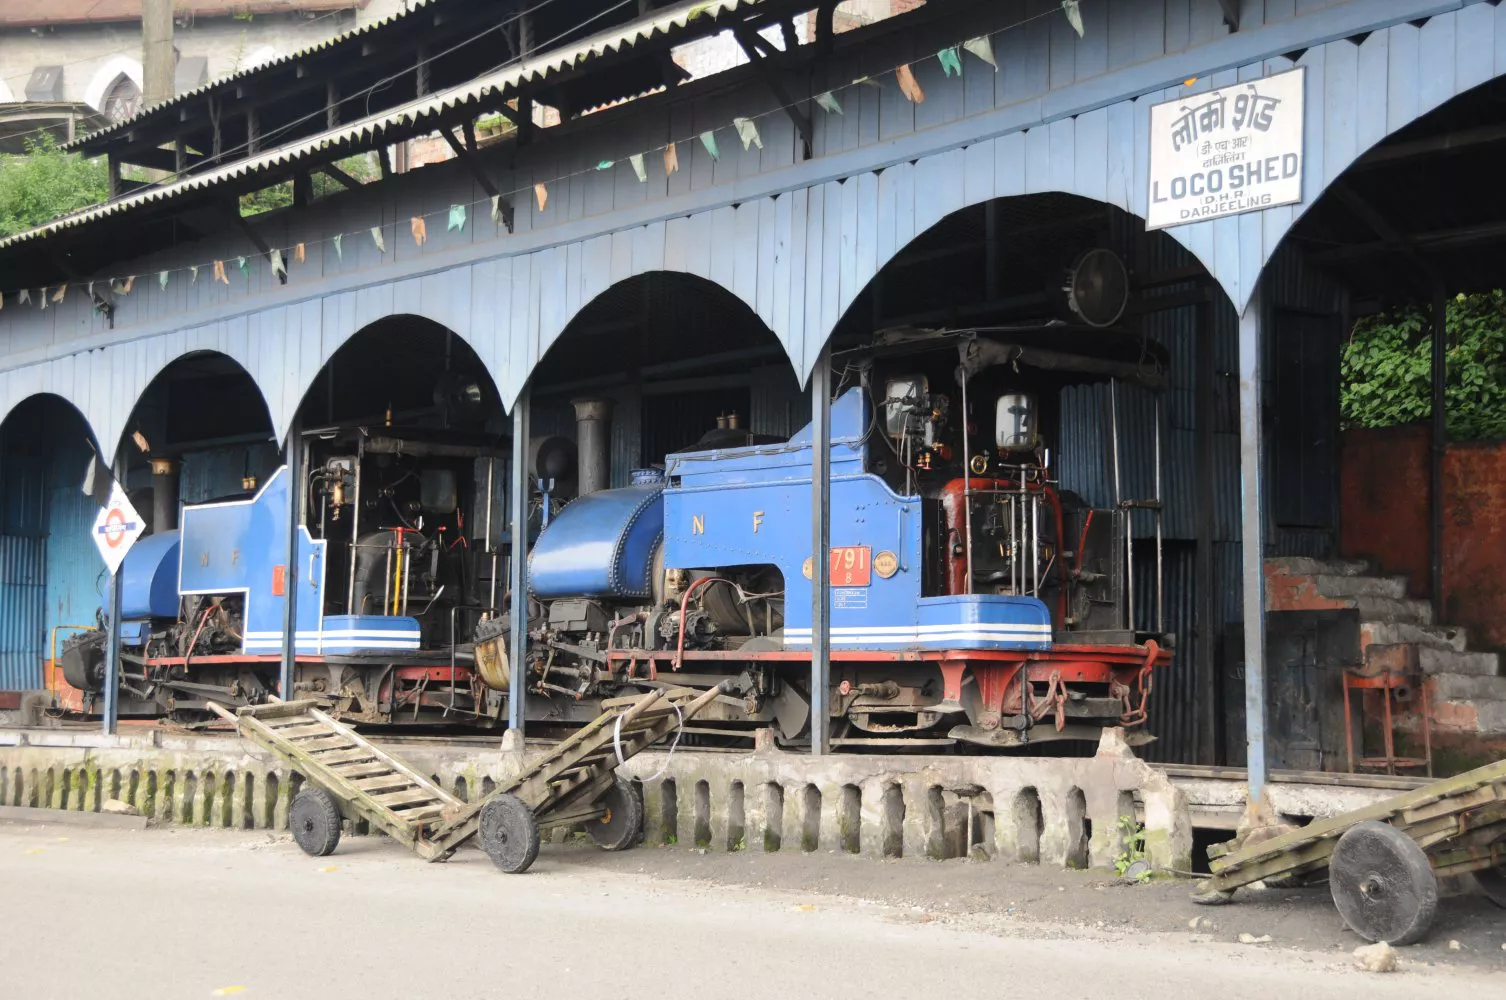 Tindharia Loco Shed the only Loco Shed in the hills of Darjeeling